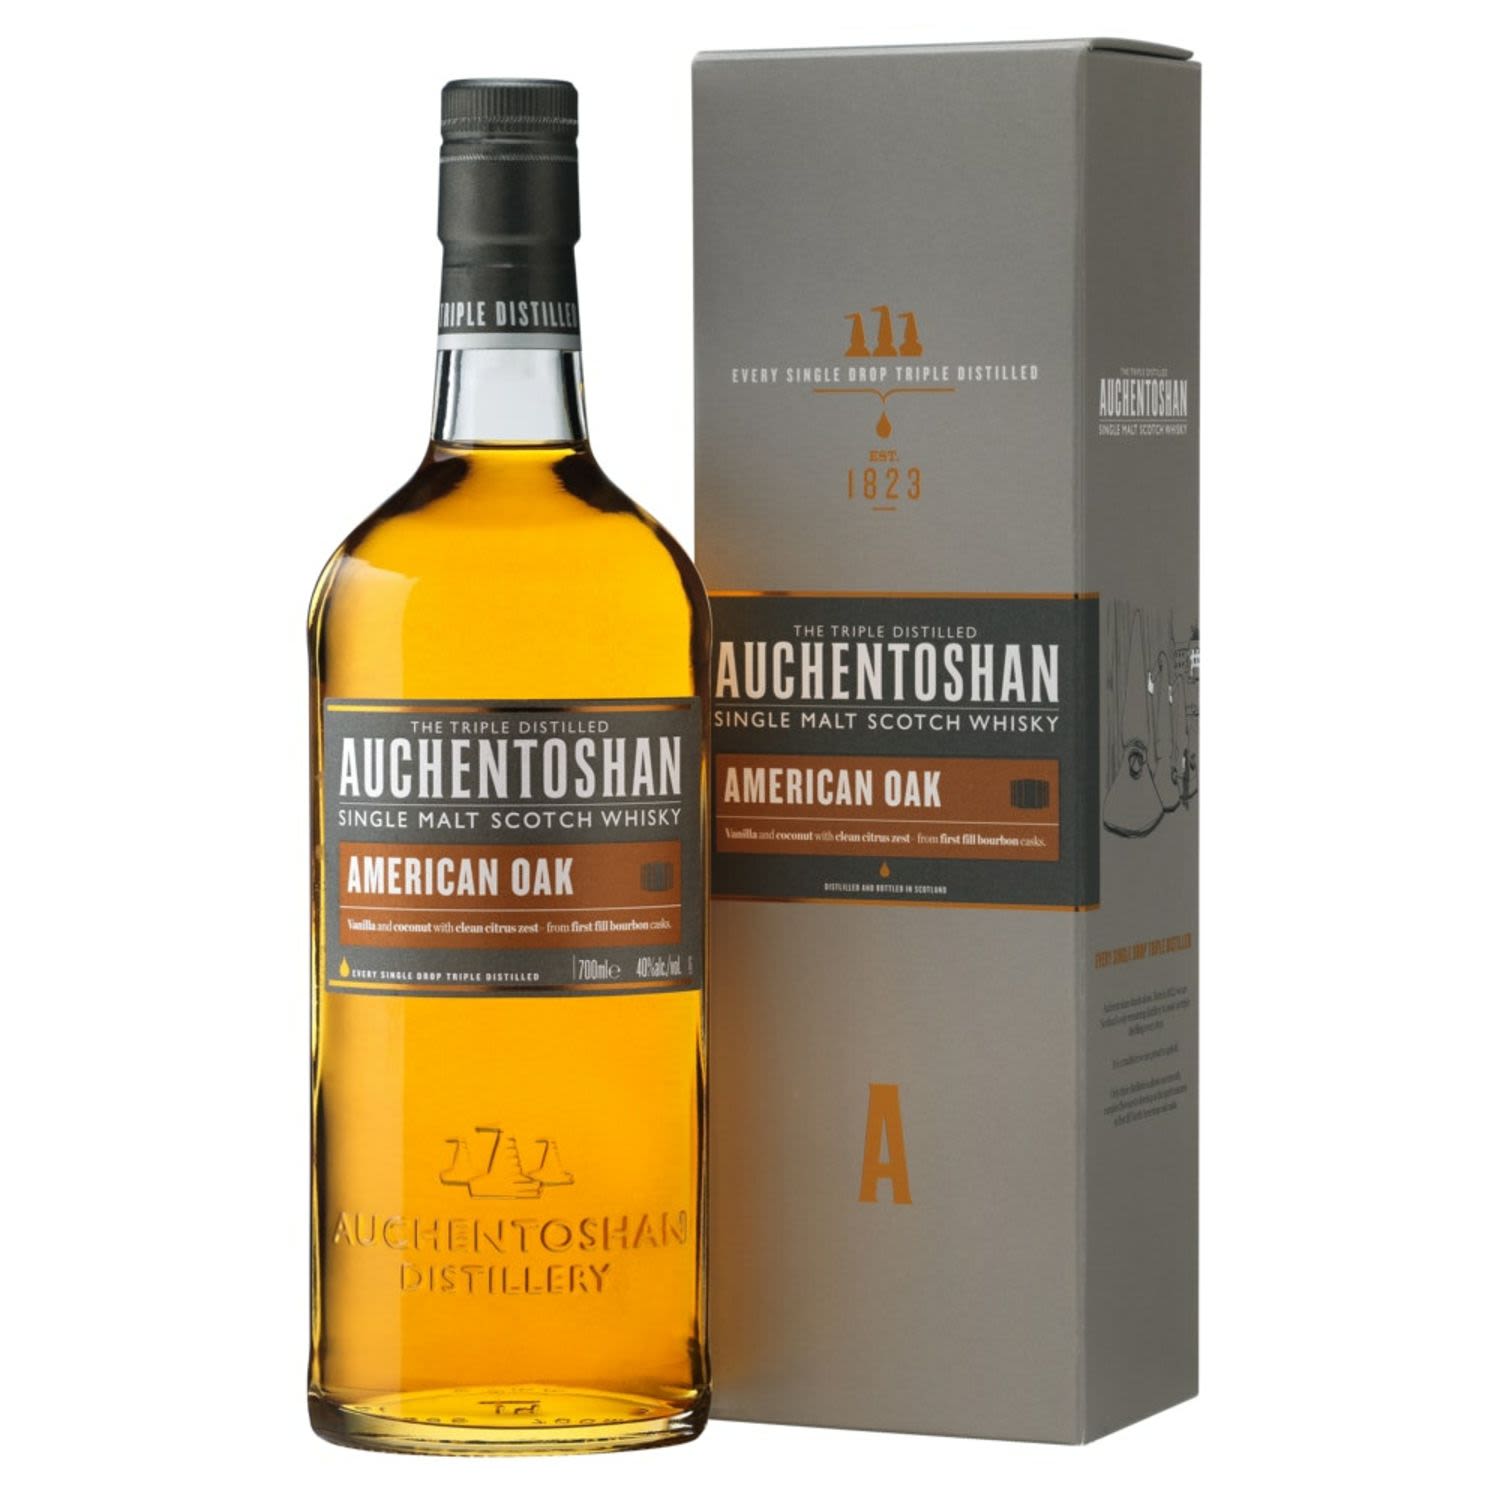 Triple distilled and matured solely in American bourbon casks. The result: a Lowland Single Malt Whisky with the sweet aromas of vanilla and coconut - along with the signature smooth, delicate, Auchentoshan taste.<br /> <br />Alcohol Volume: 40.00%<br /><br />Pack Format: 6 Pack<br /><br />Standard Drinks: 22.1</br /><br />Pack Type: Can<br /><br />Country of Origin: Scotland<br />